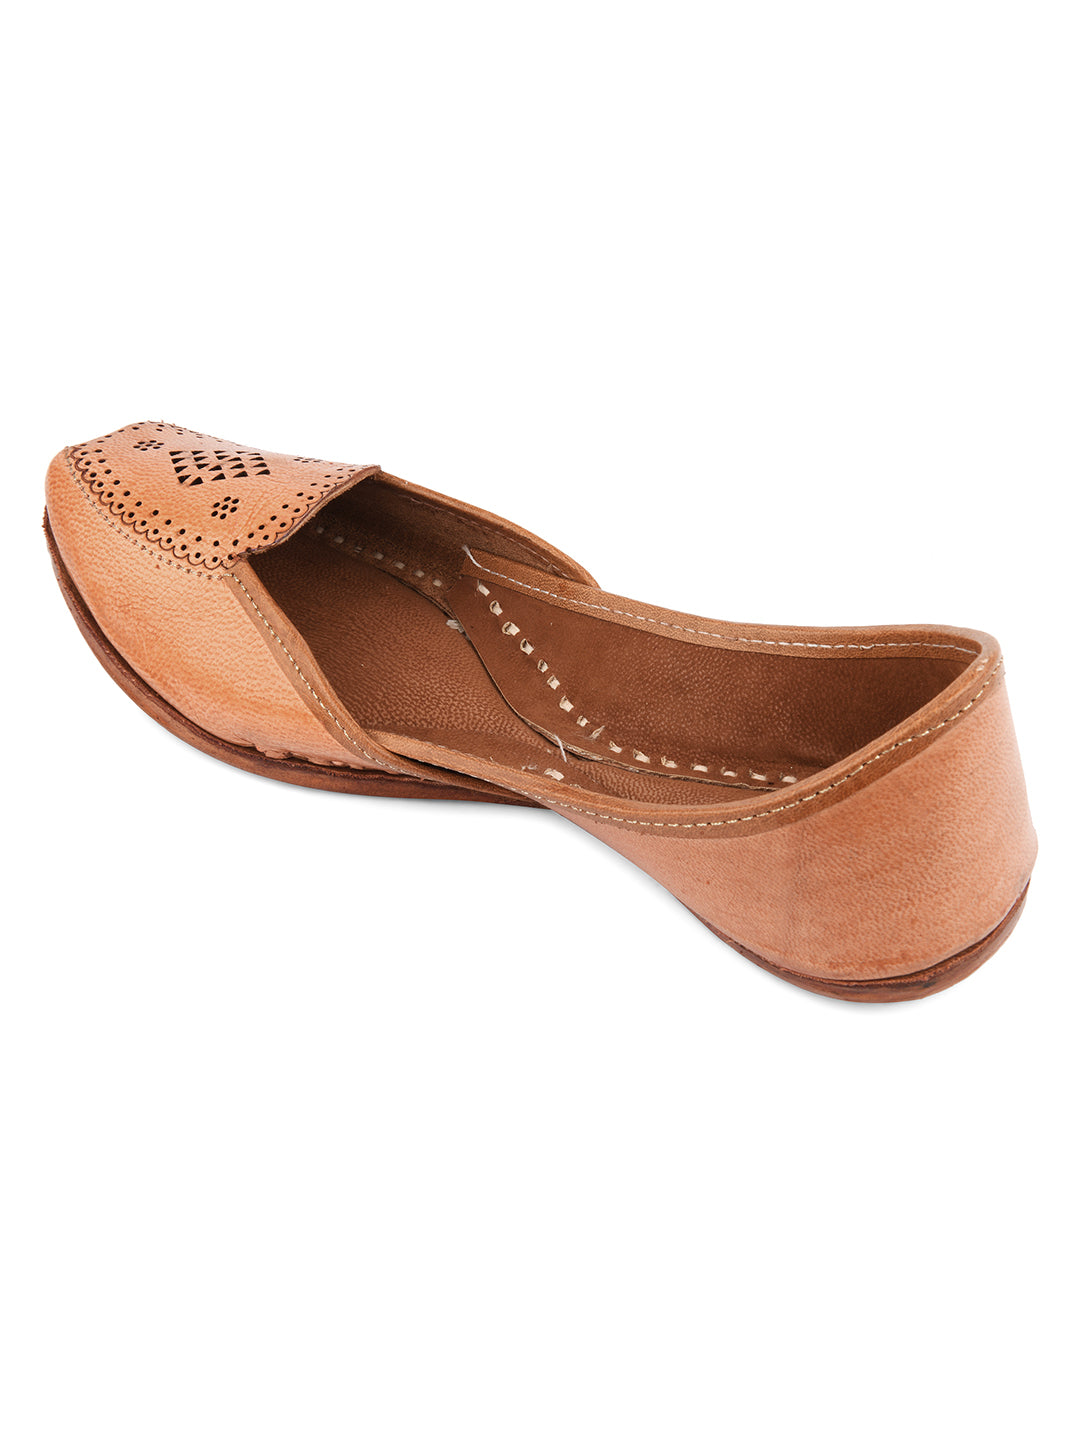 DESI COLOUR Women Nude-Coloured Embellished Leather Ethnic Mojaris with Laser Cuts Flats